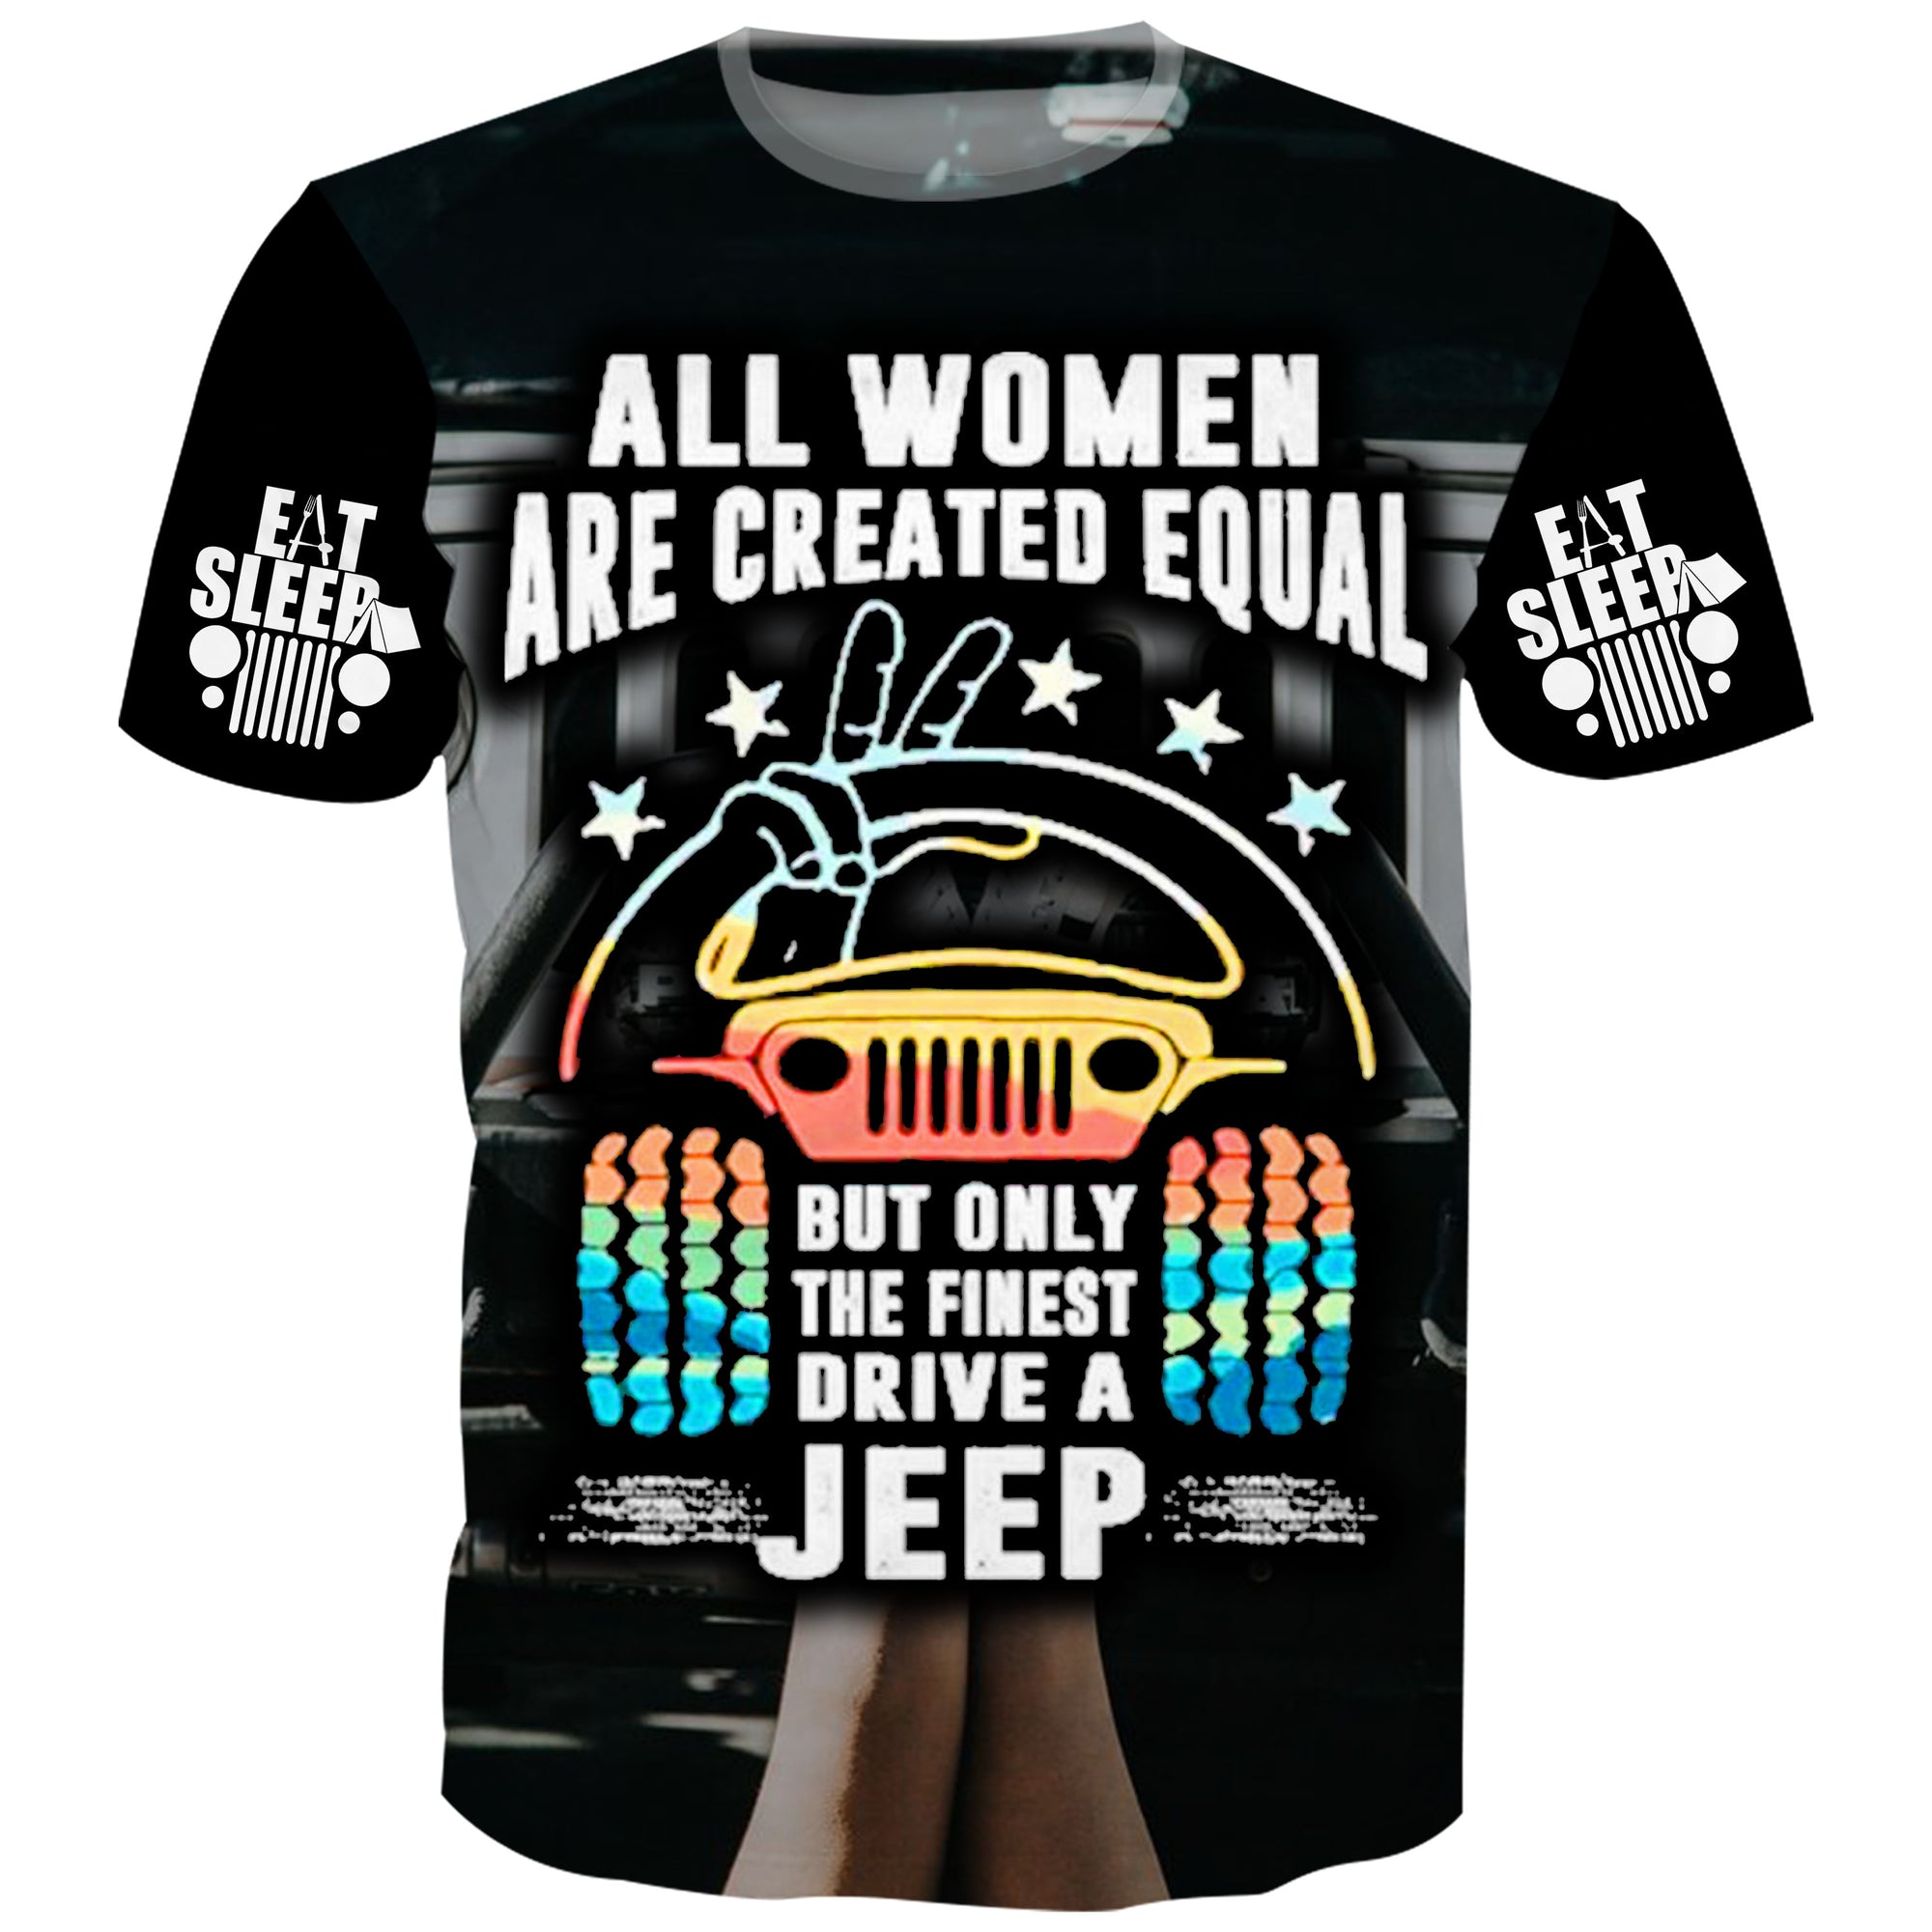 All Women are created equal - T-Shirt